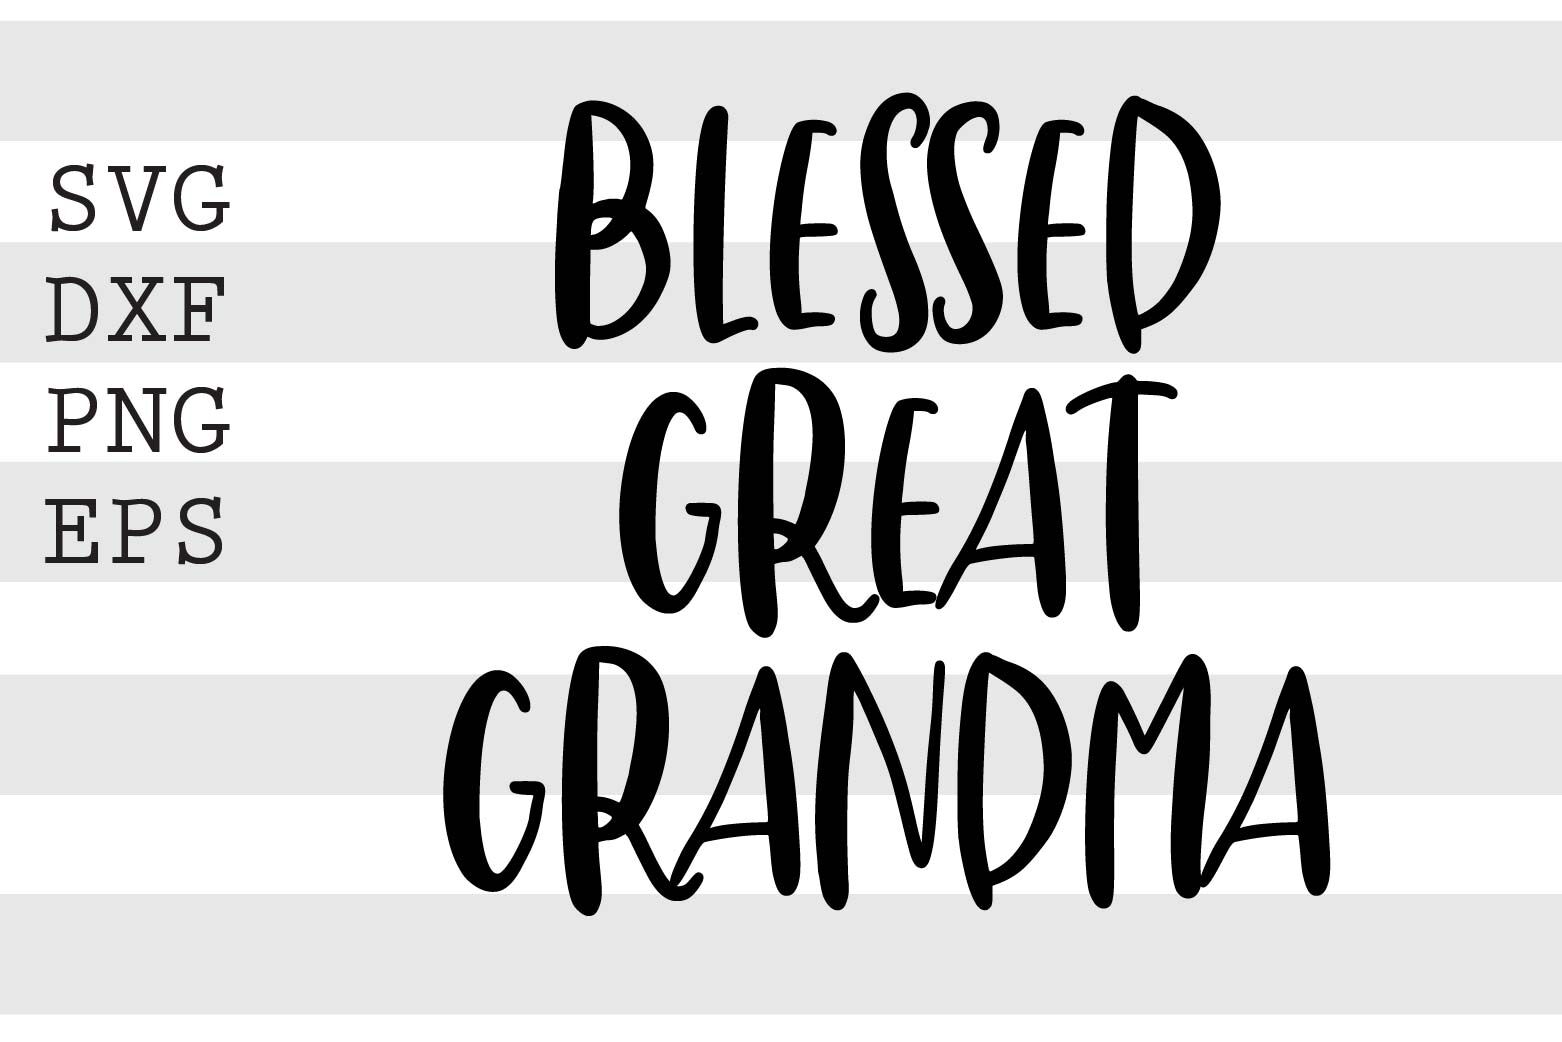 Blessed great grandma SVG By spoonyprint  TheHungryJPEG